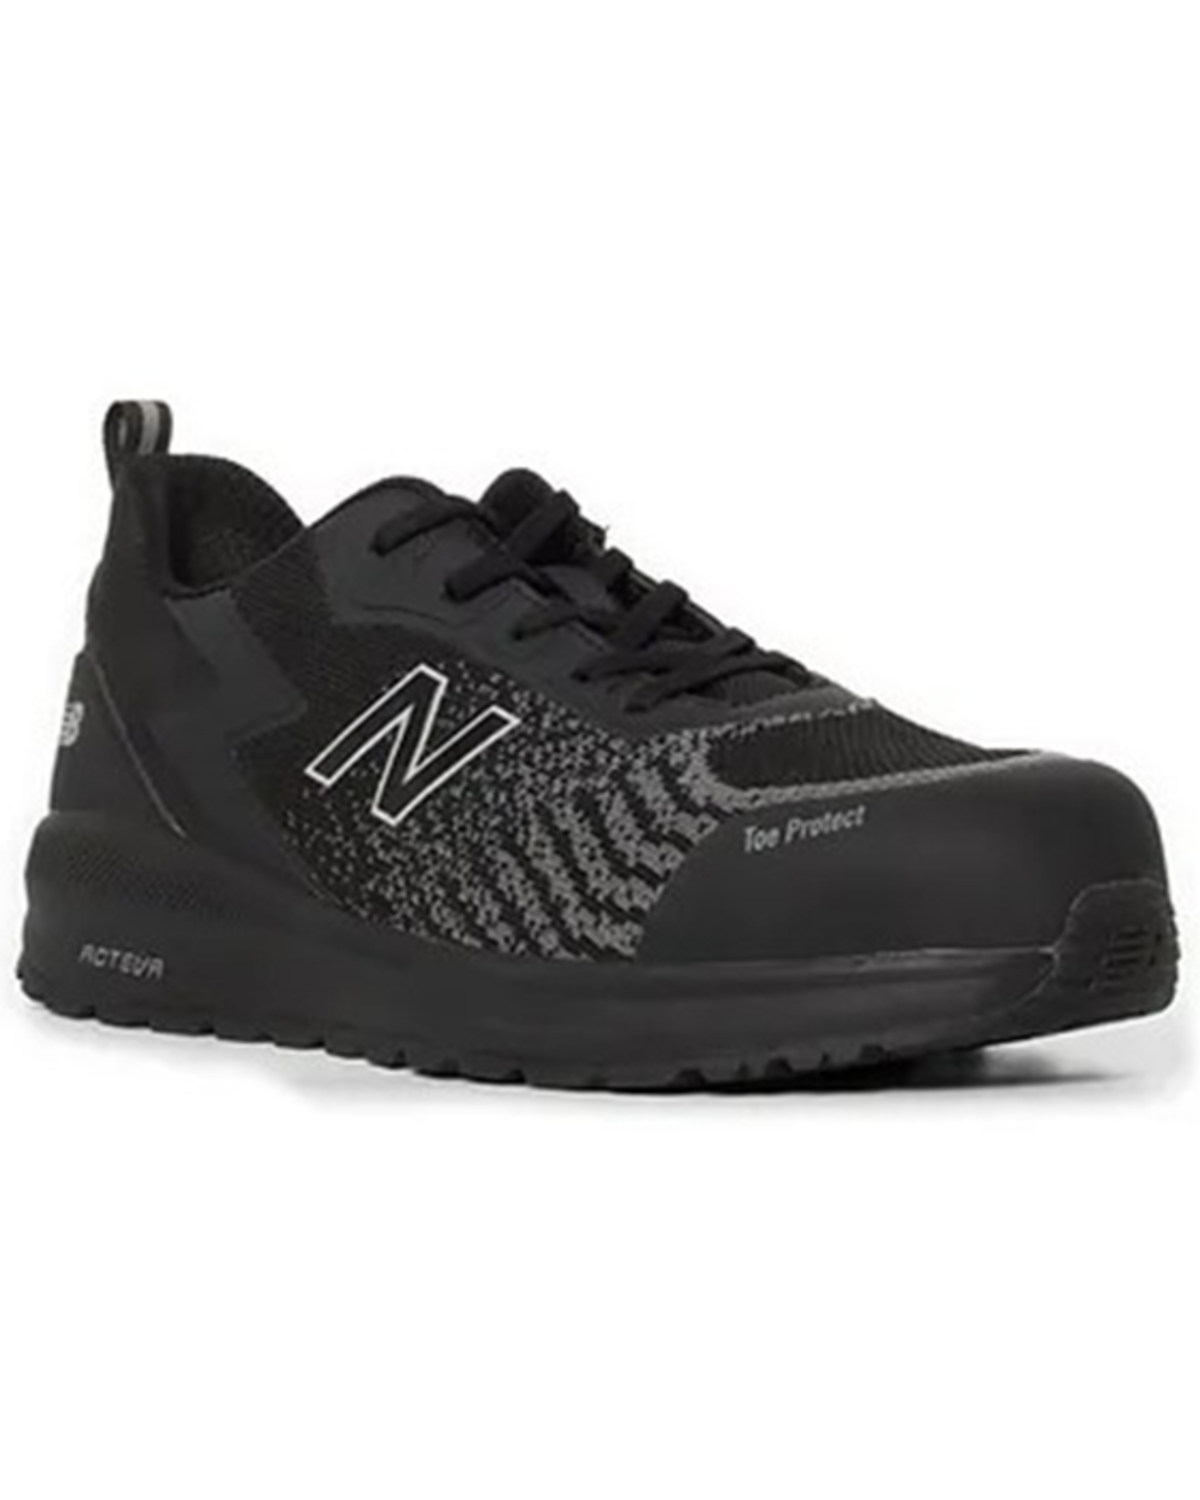 New Balance Men's Speedware Lace-Up Work Shoes